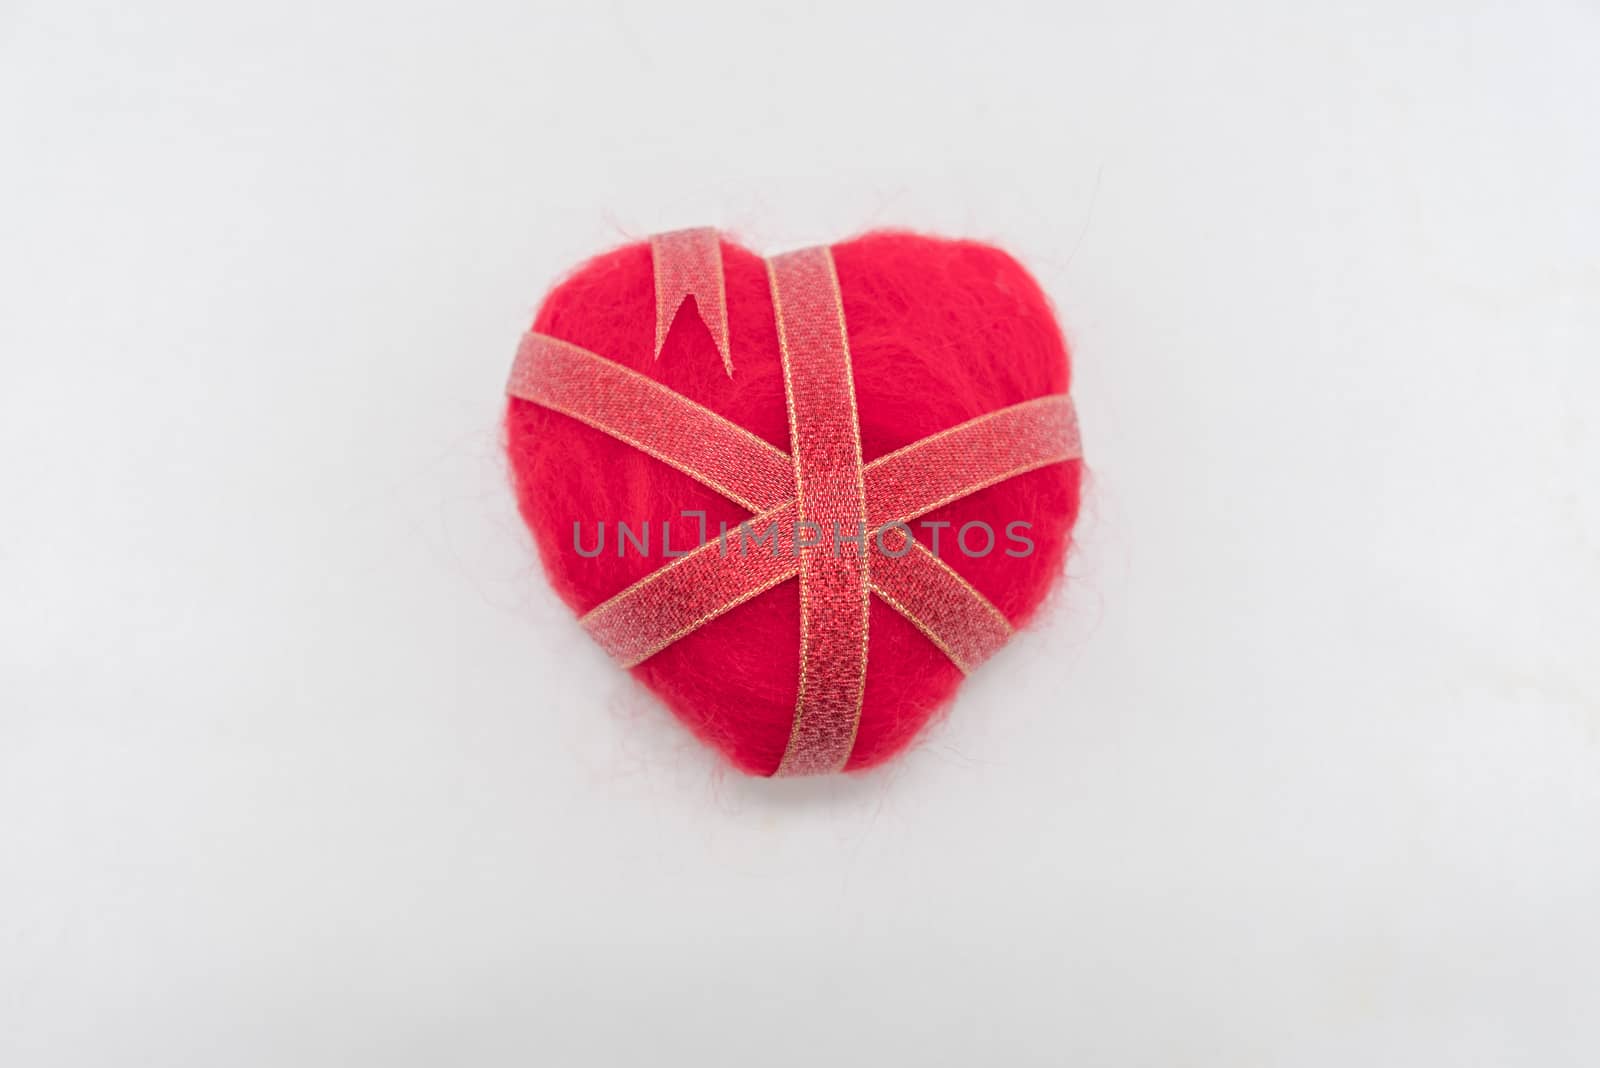 Ribbon wrapped heart on wood background